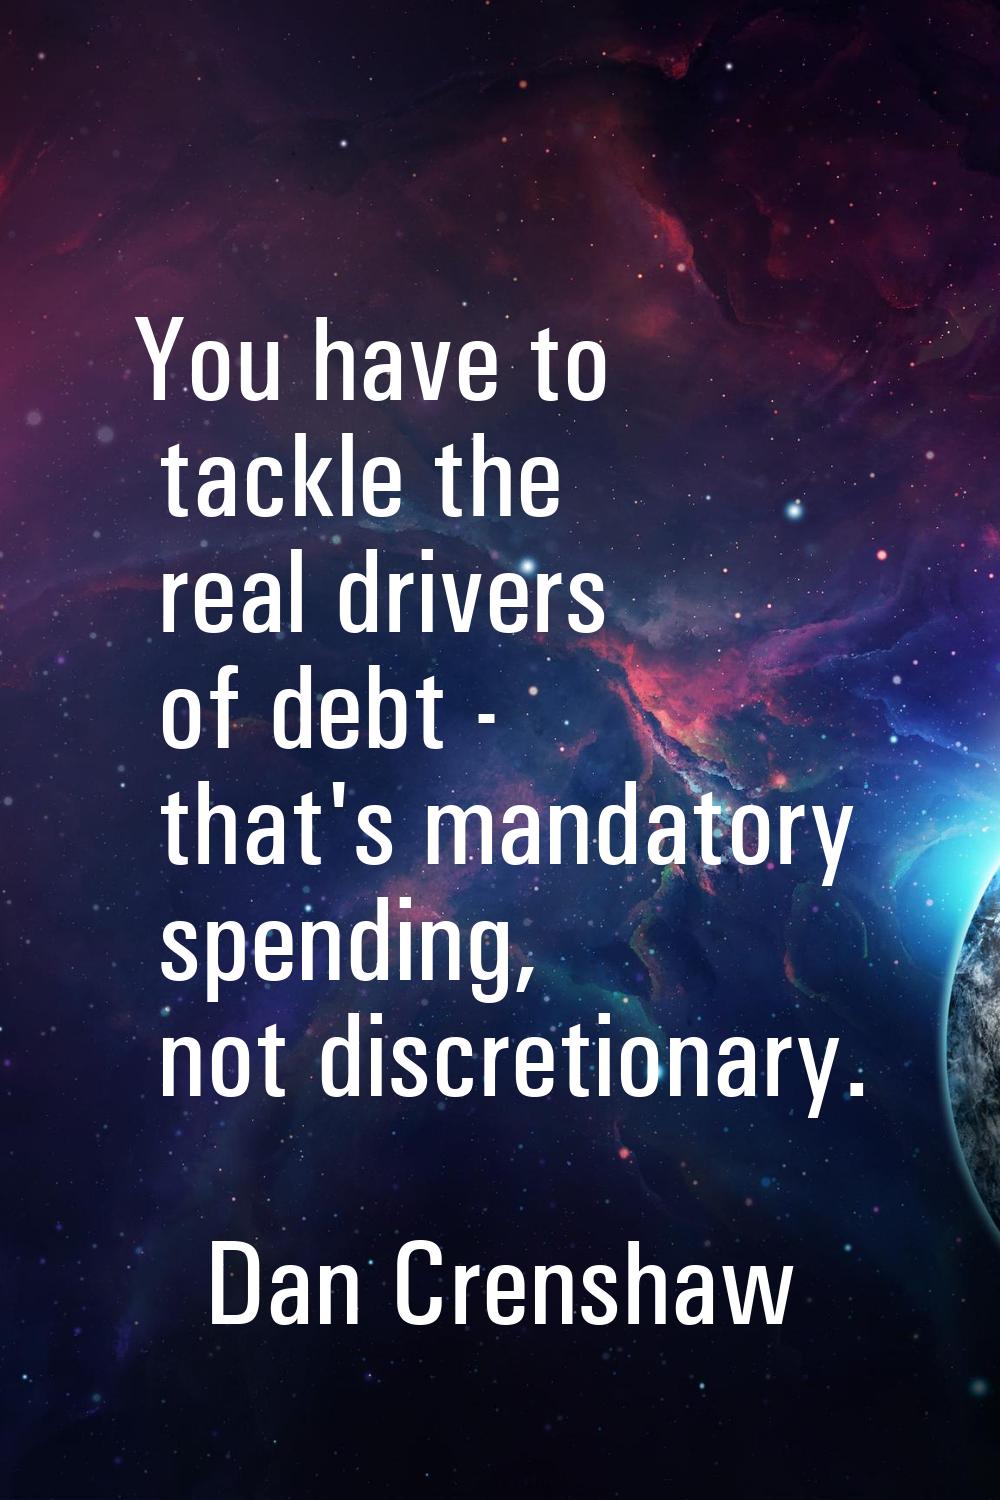 You have to tackle the real drivers of debt - that's mandatory spending, not discretionary.